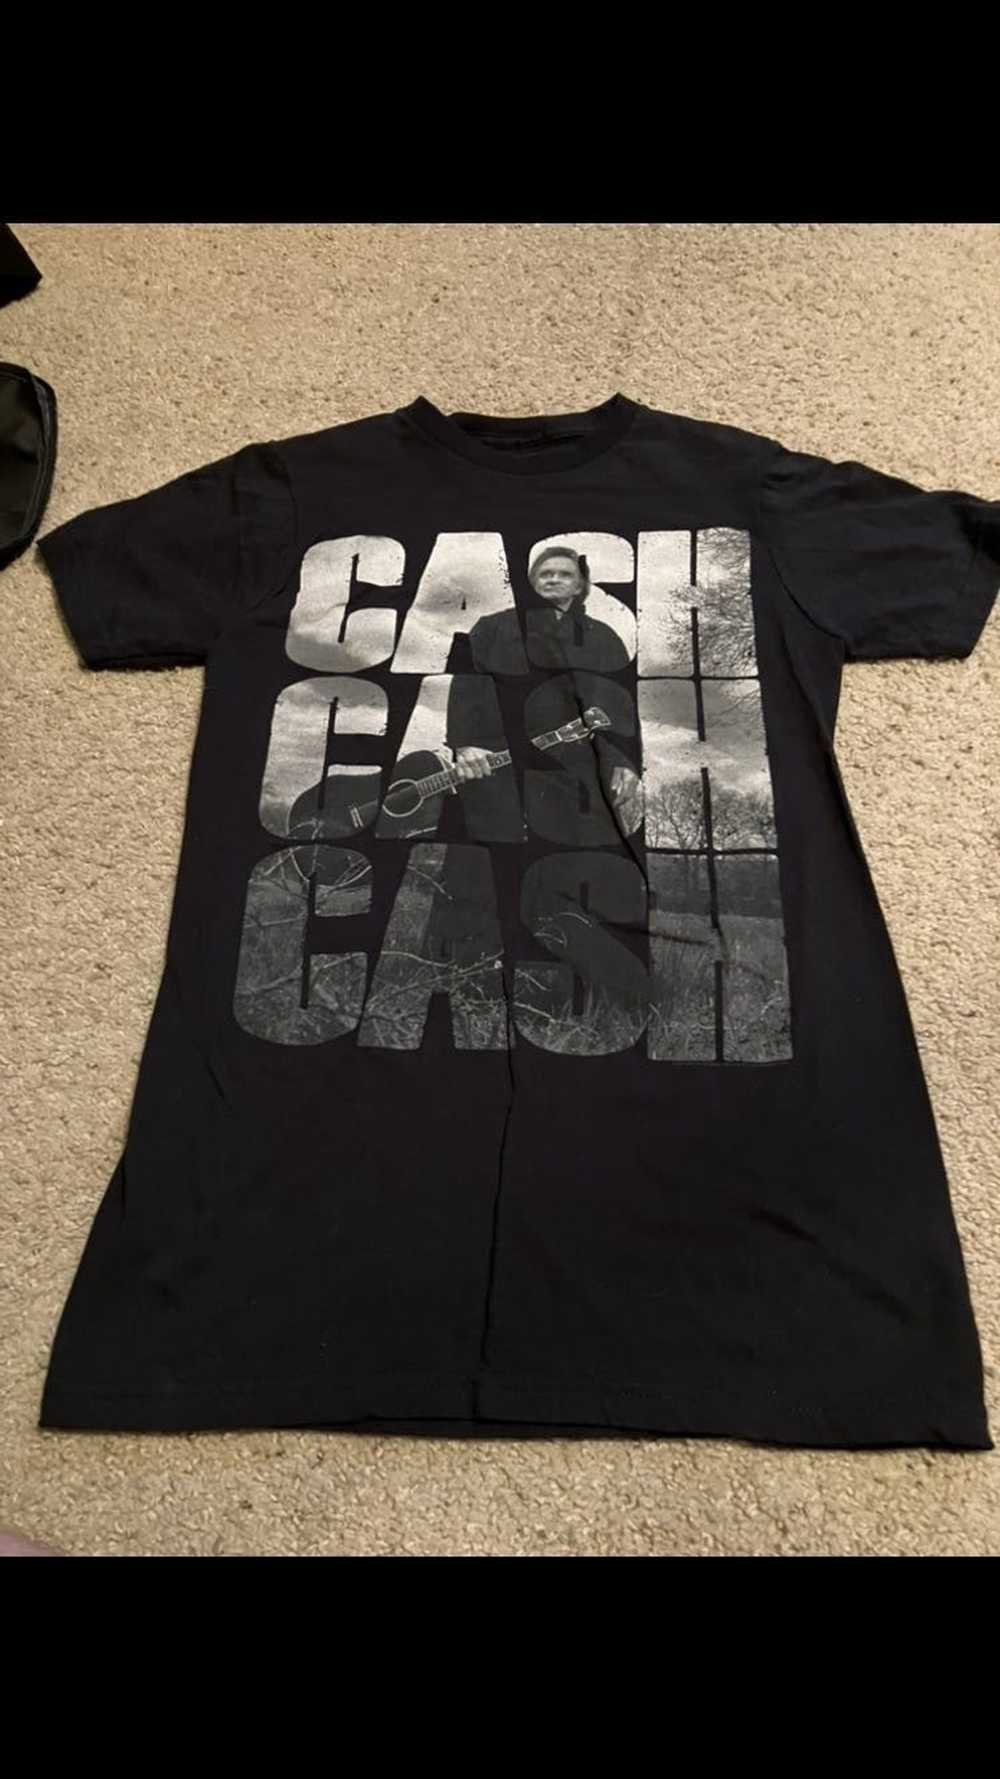 Zion Rootswear johnny cash cash shirt small - image 1